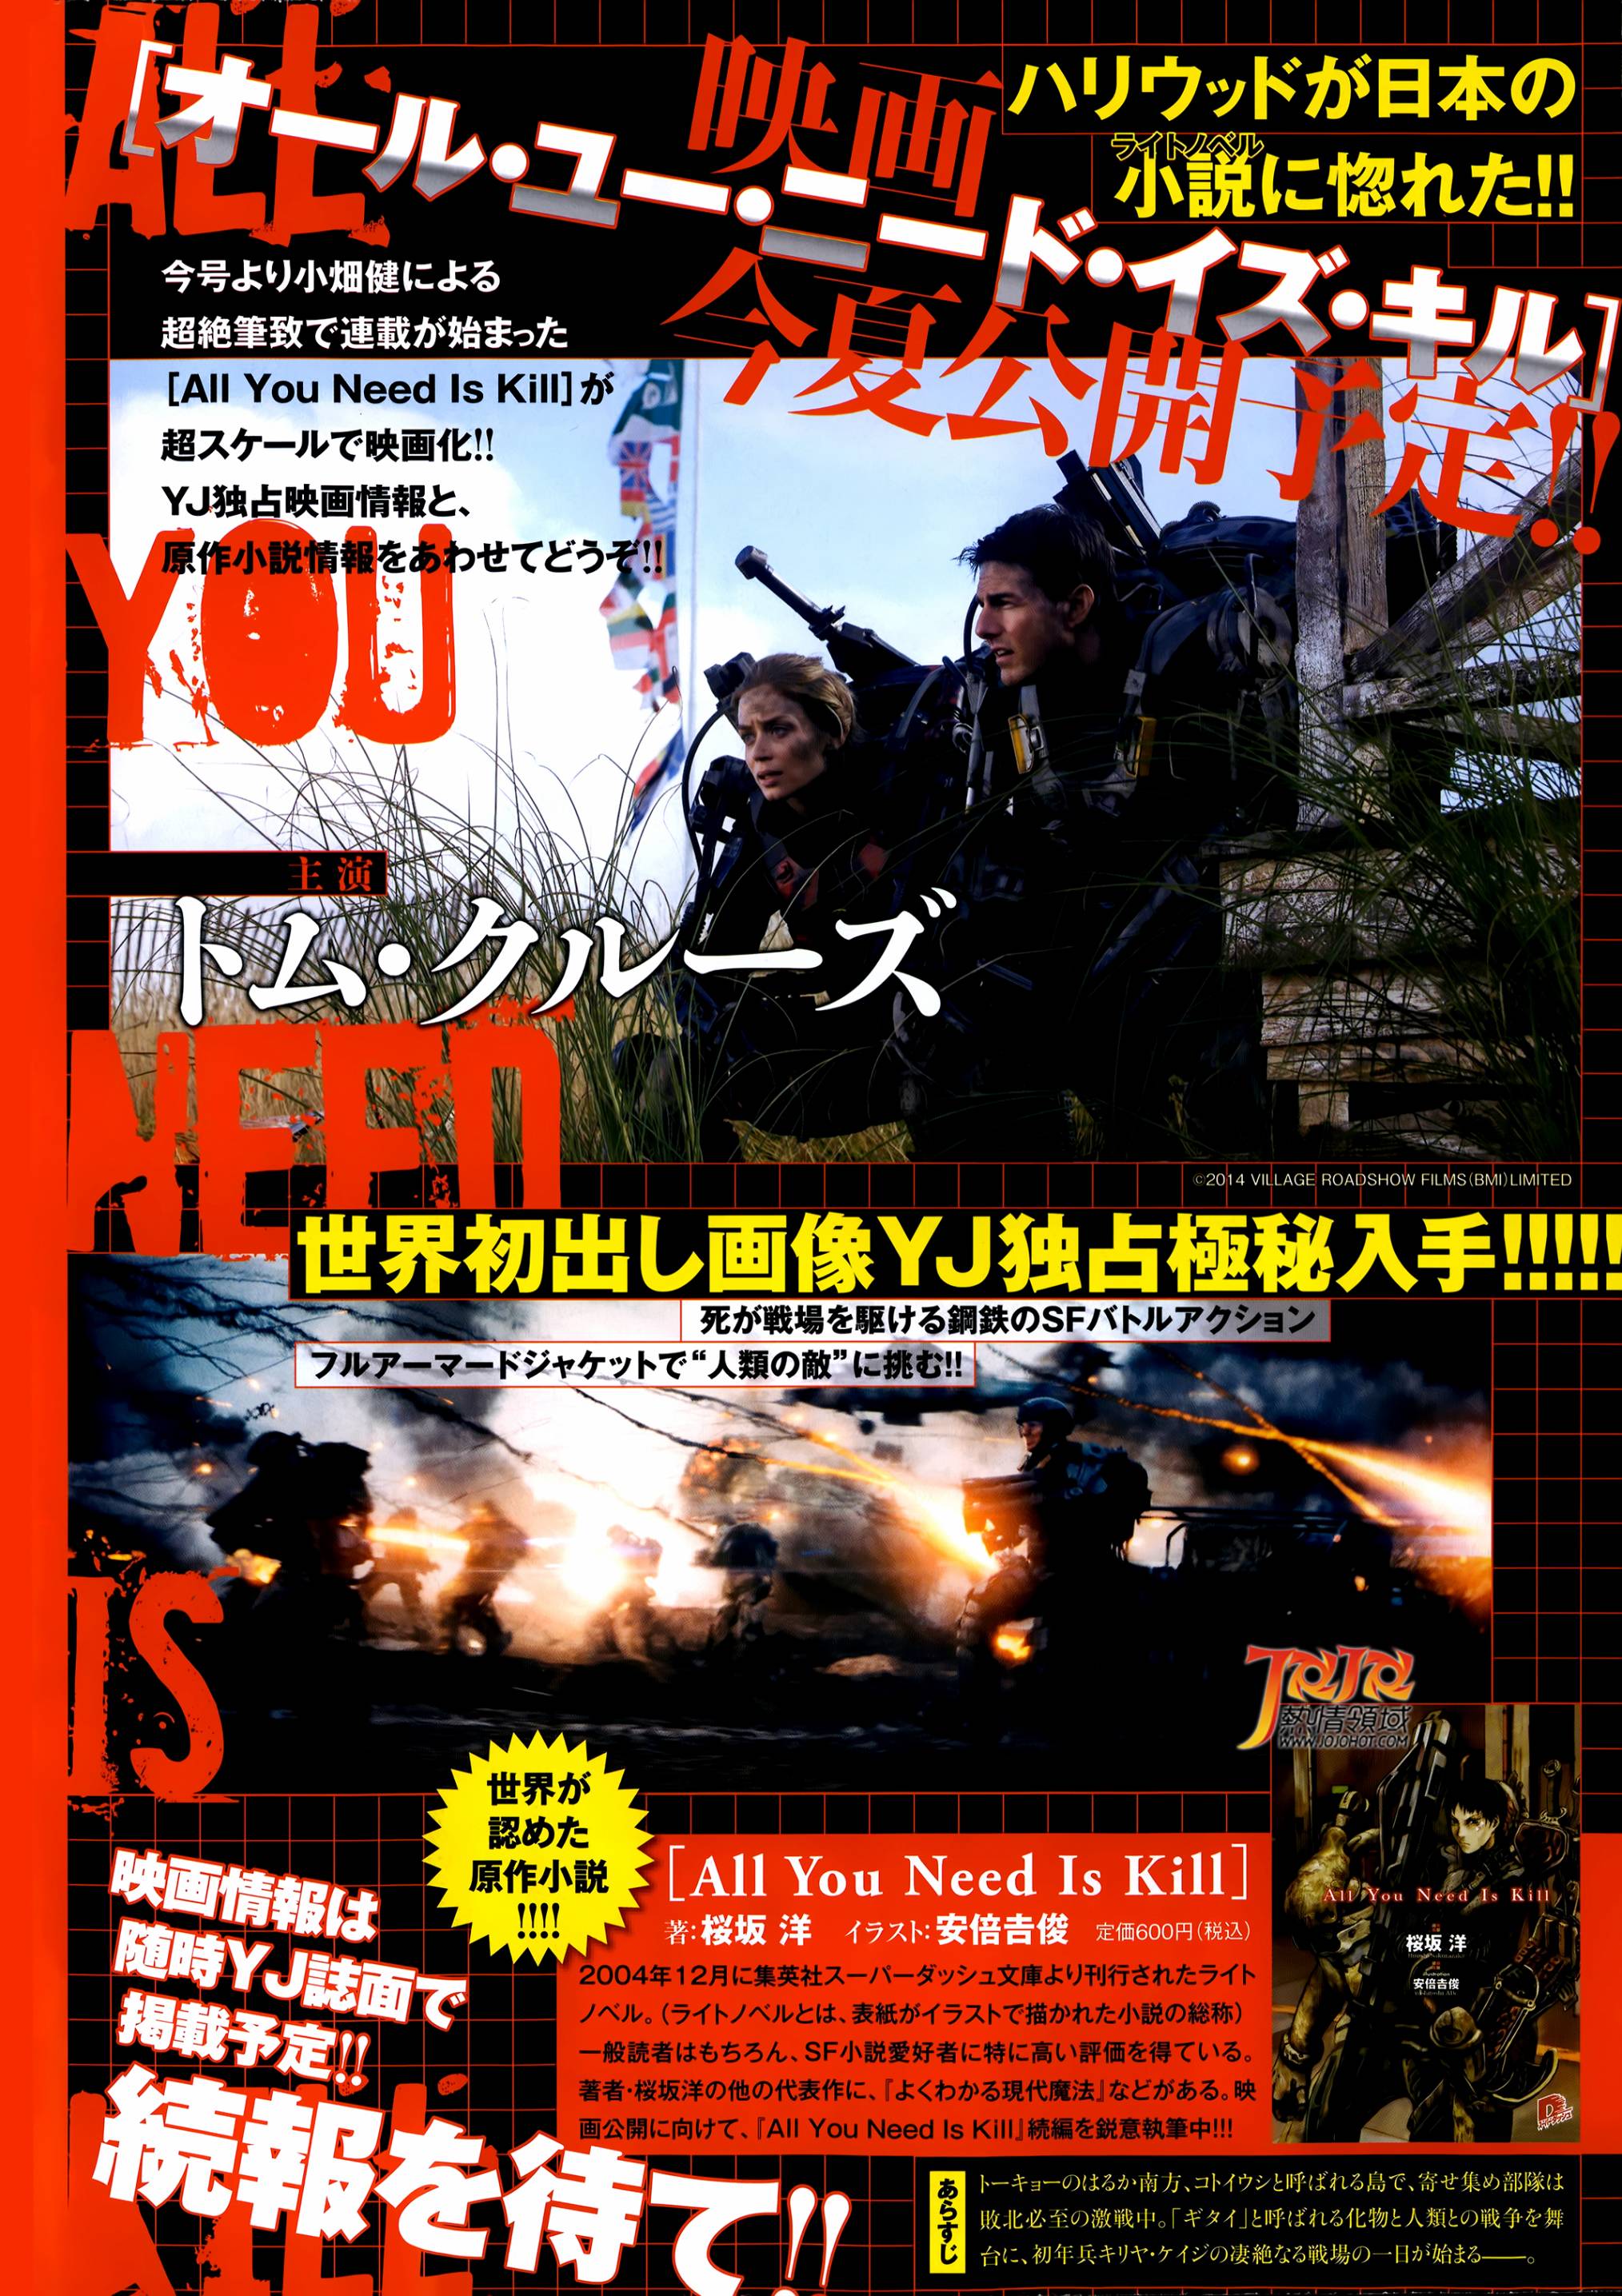 All You Need Is Kill - 第01話(1/2) - 3